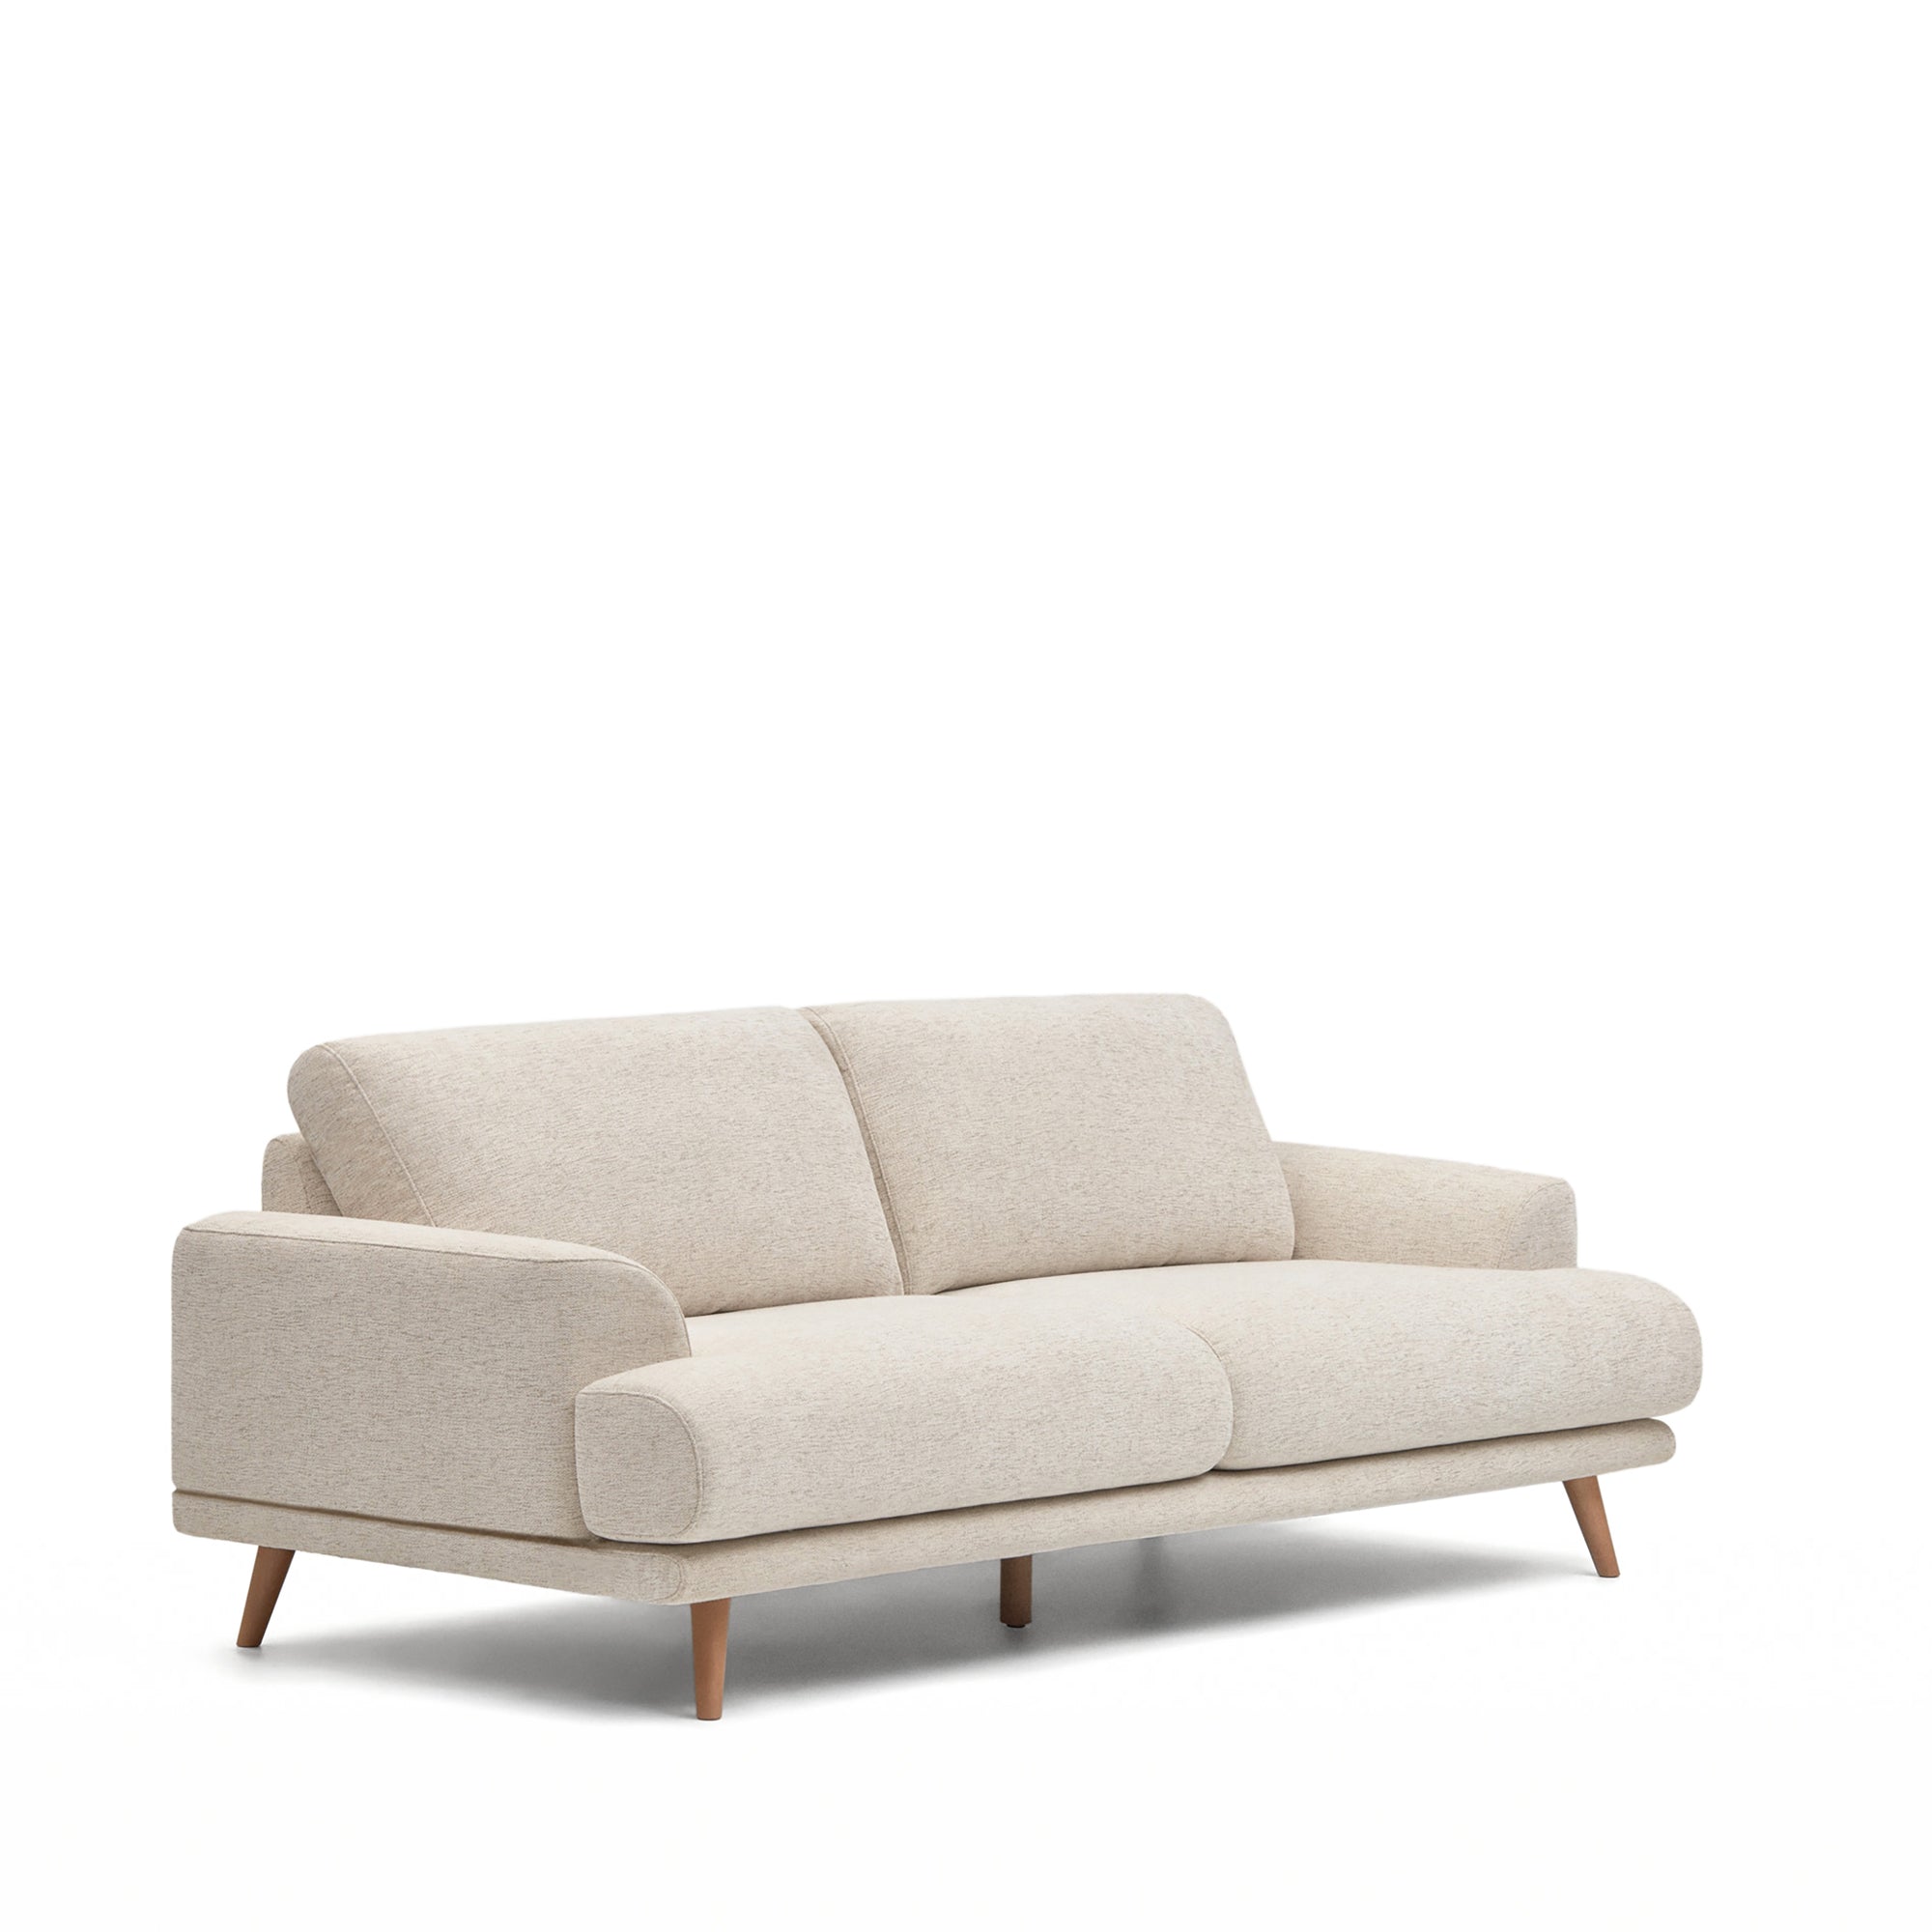 Karin 2 seater sofa in beige with solid beech wood legs, 210 cm